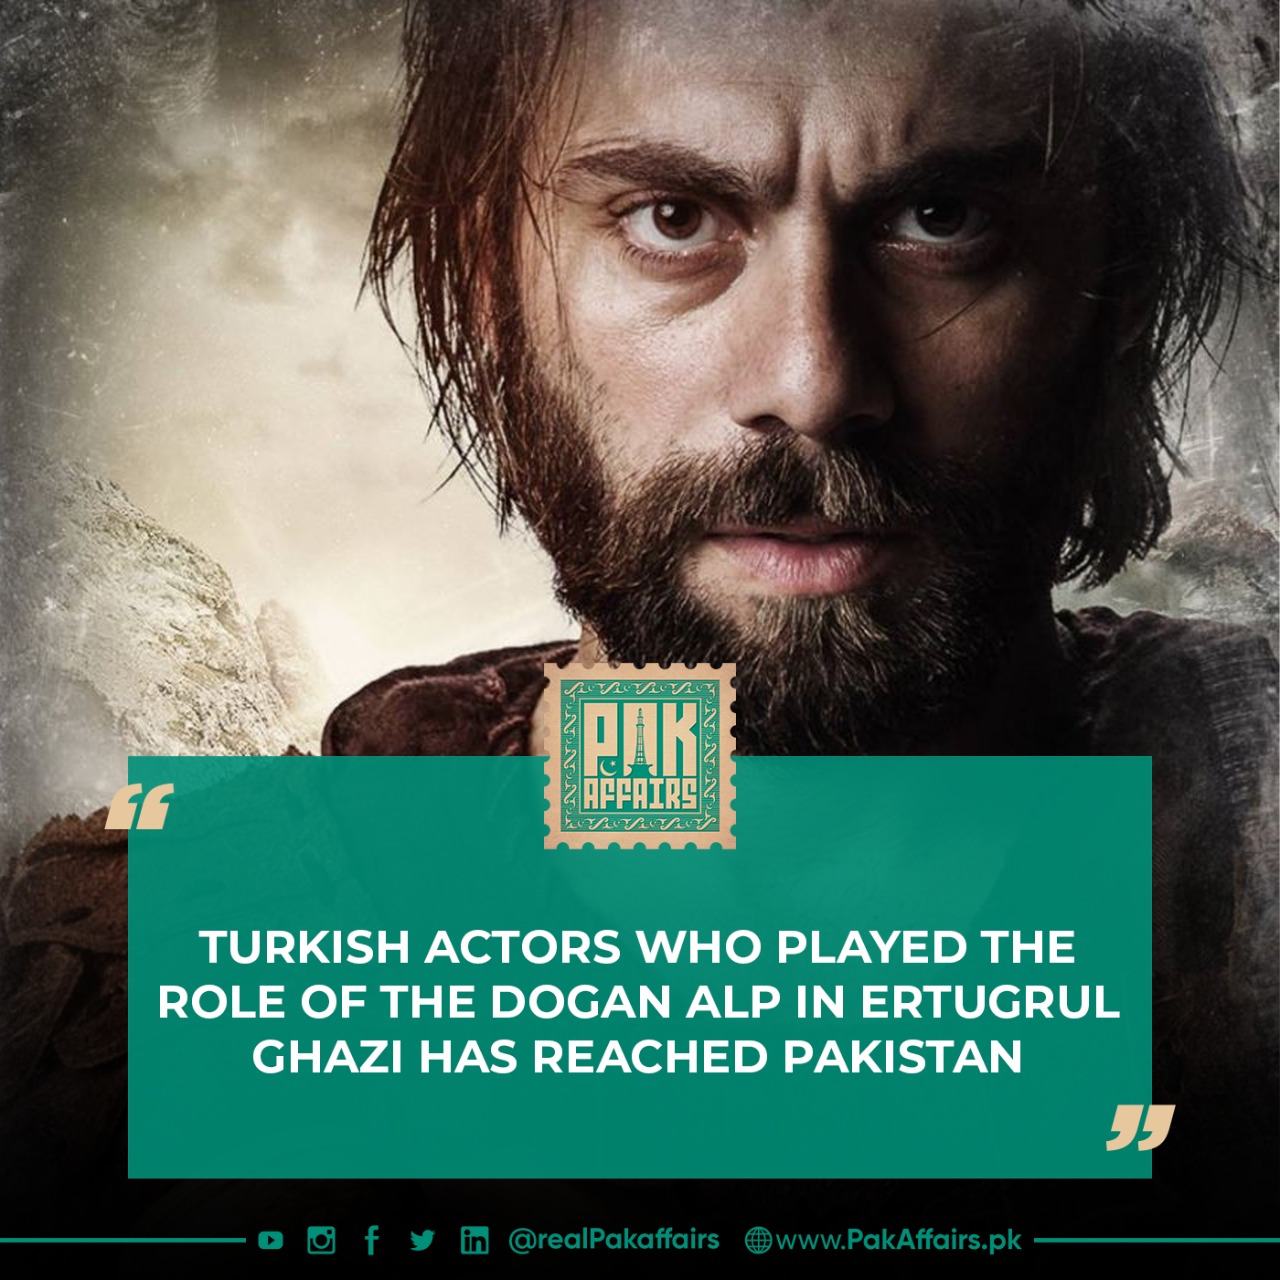 Turkish actors who played the role of the Dogan Alp in Ertugrul Ghazi has reached Pakistan.